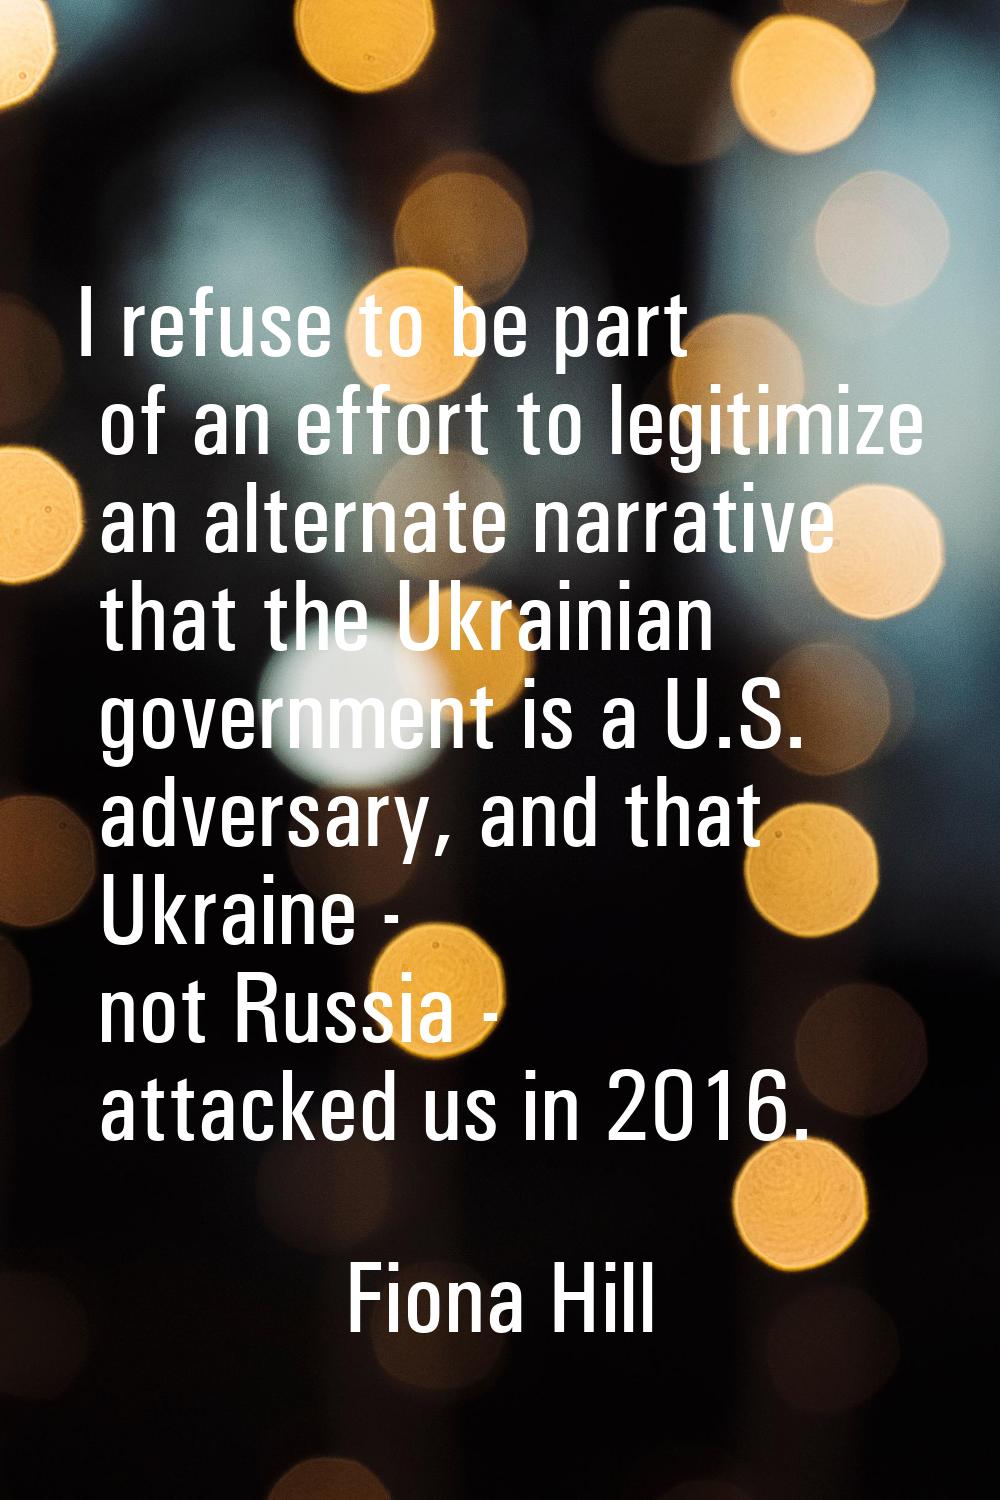 I refuse to be part of an effort to legitimize an alternate narrative that the Ukrainian government